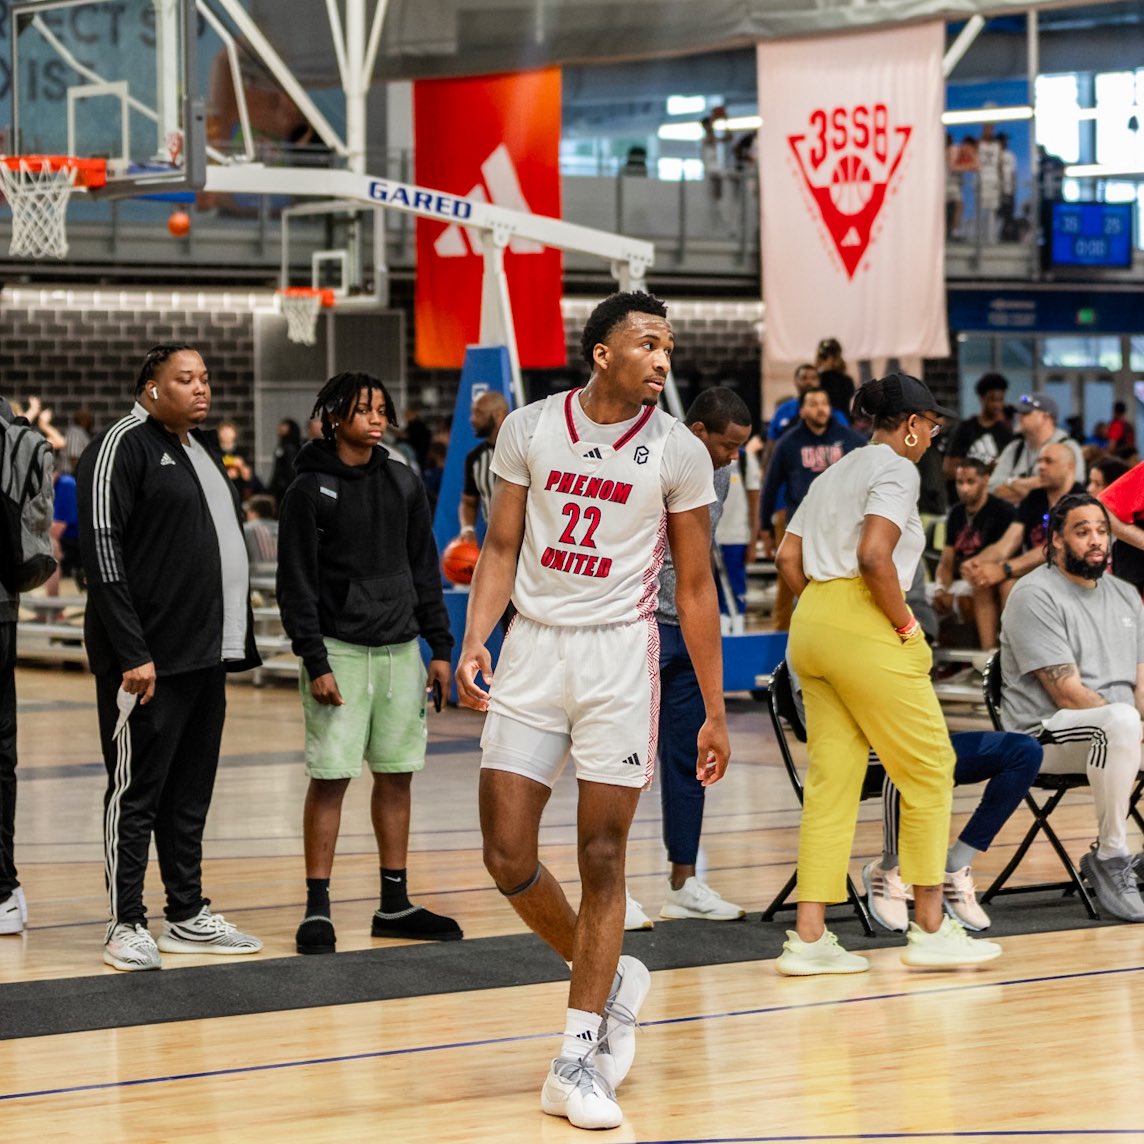 ⭐️⭐️⭐️⭐️⭐️ 2025 Darryn Peterson has received an offer from Stanford University🌲